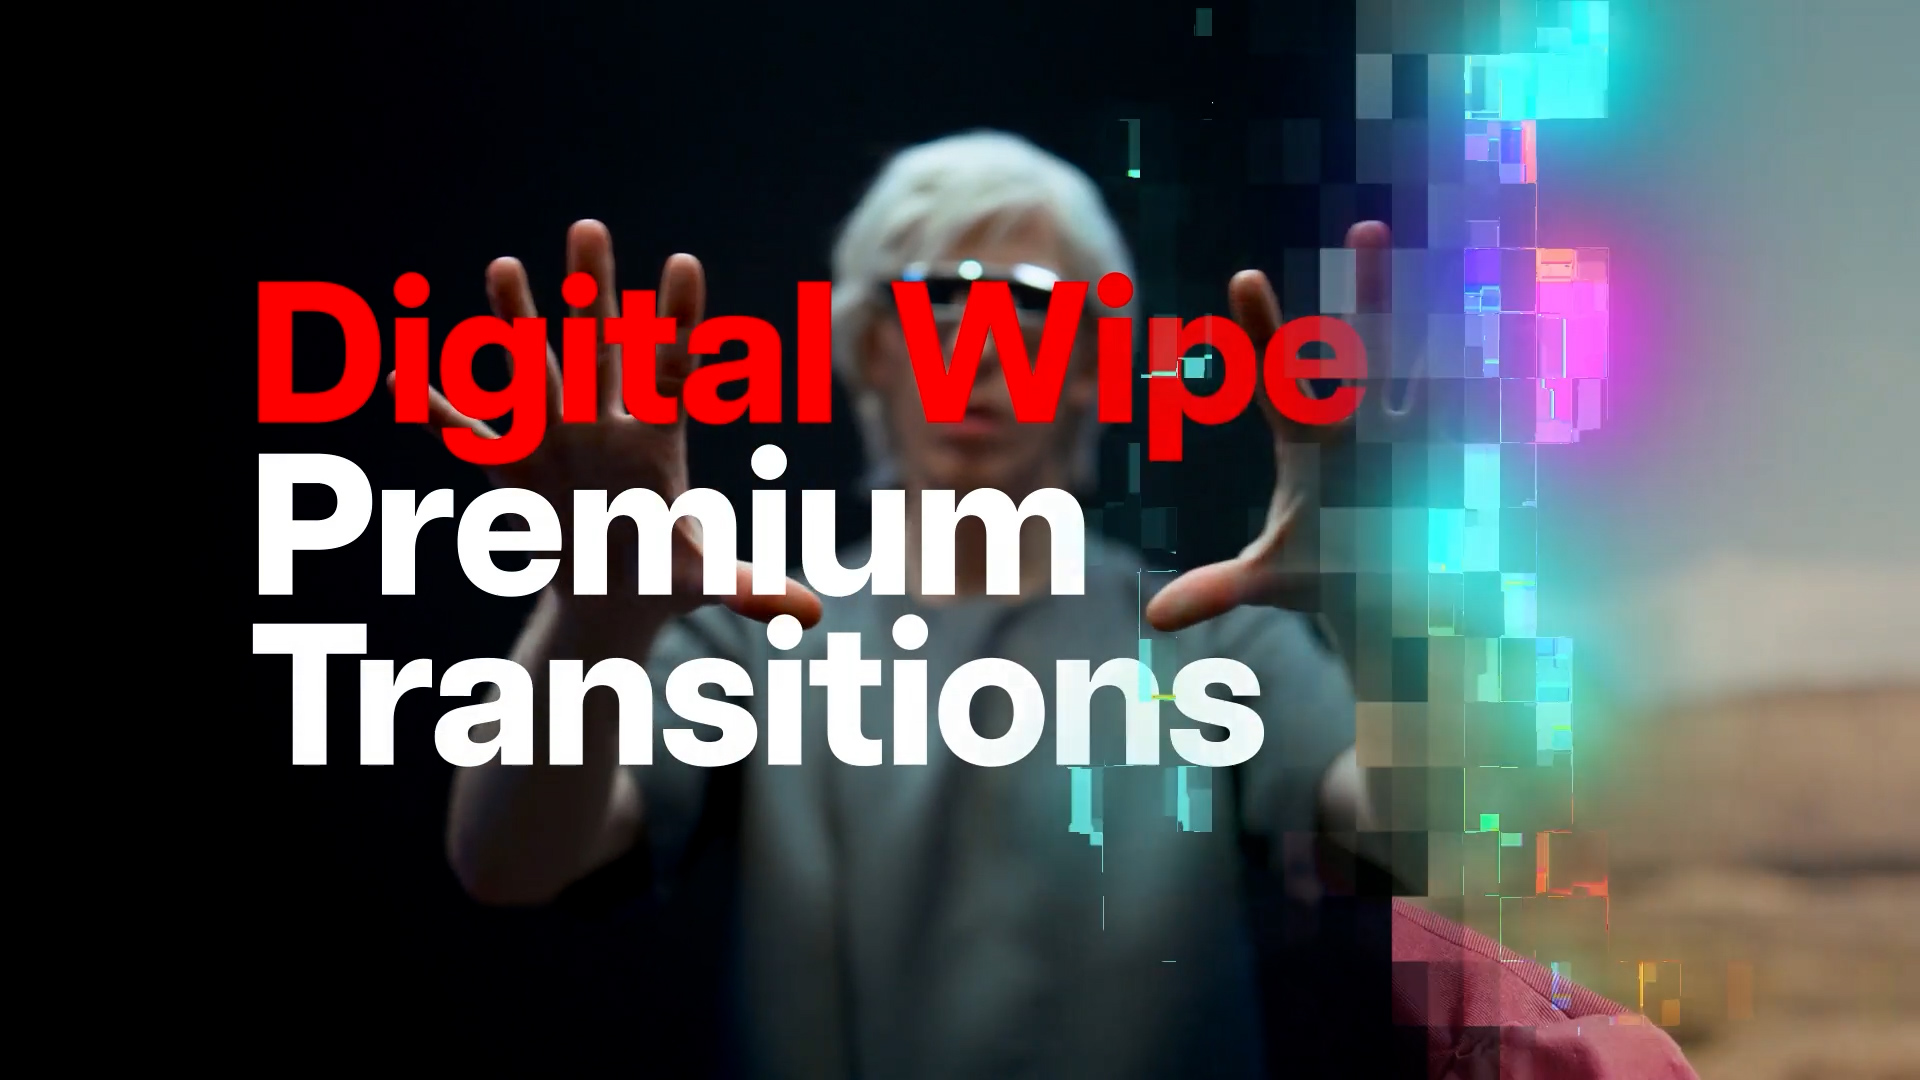 Premium Transitions Digital Wipe 51525571 Videohive - Free Download After Effects Template